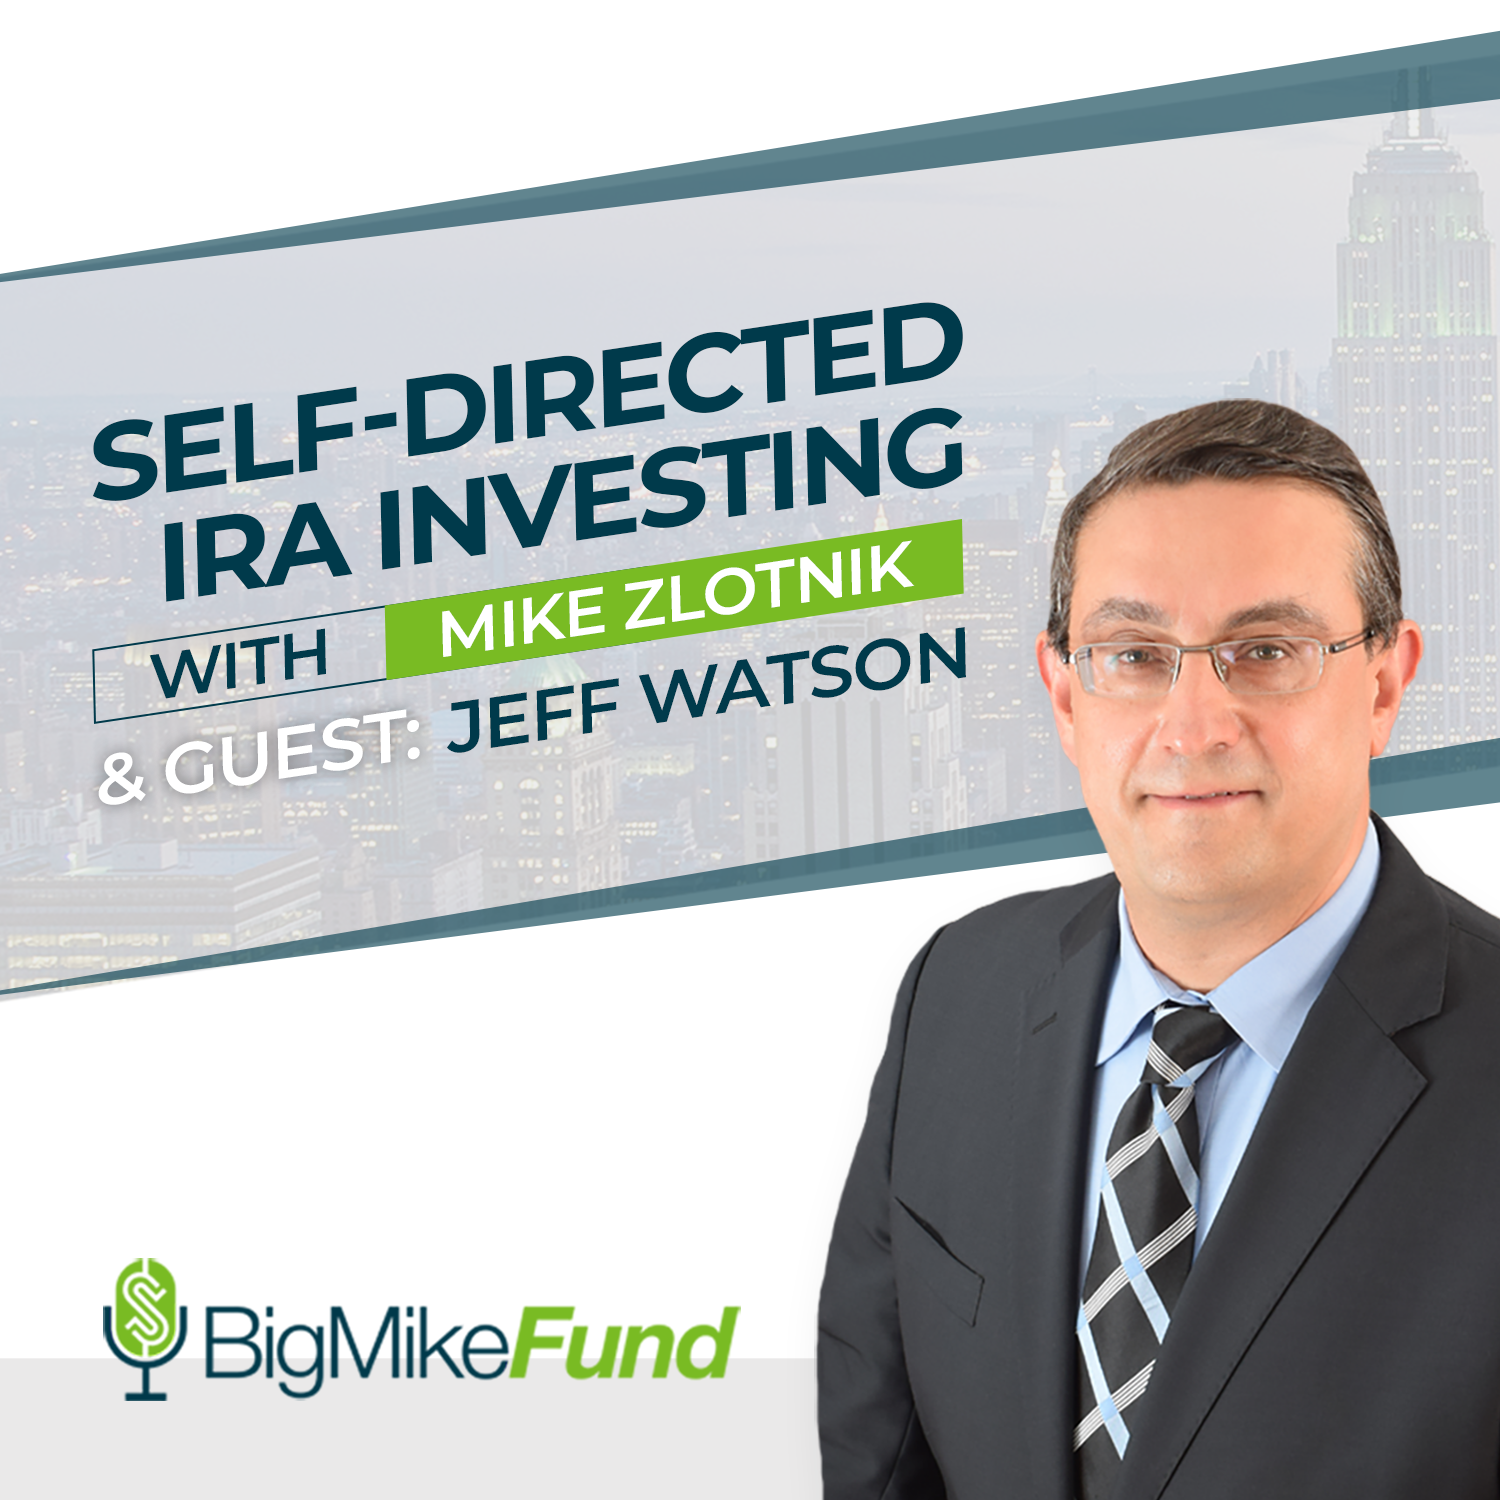 099: Self-Directed IRA Investing with Jeff Watson